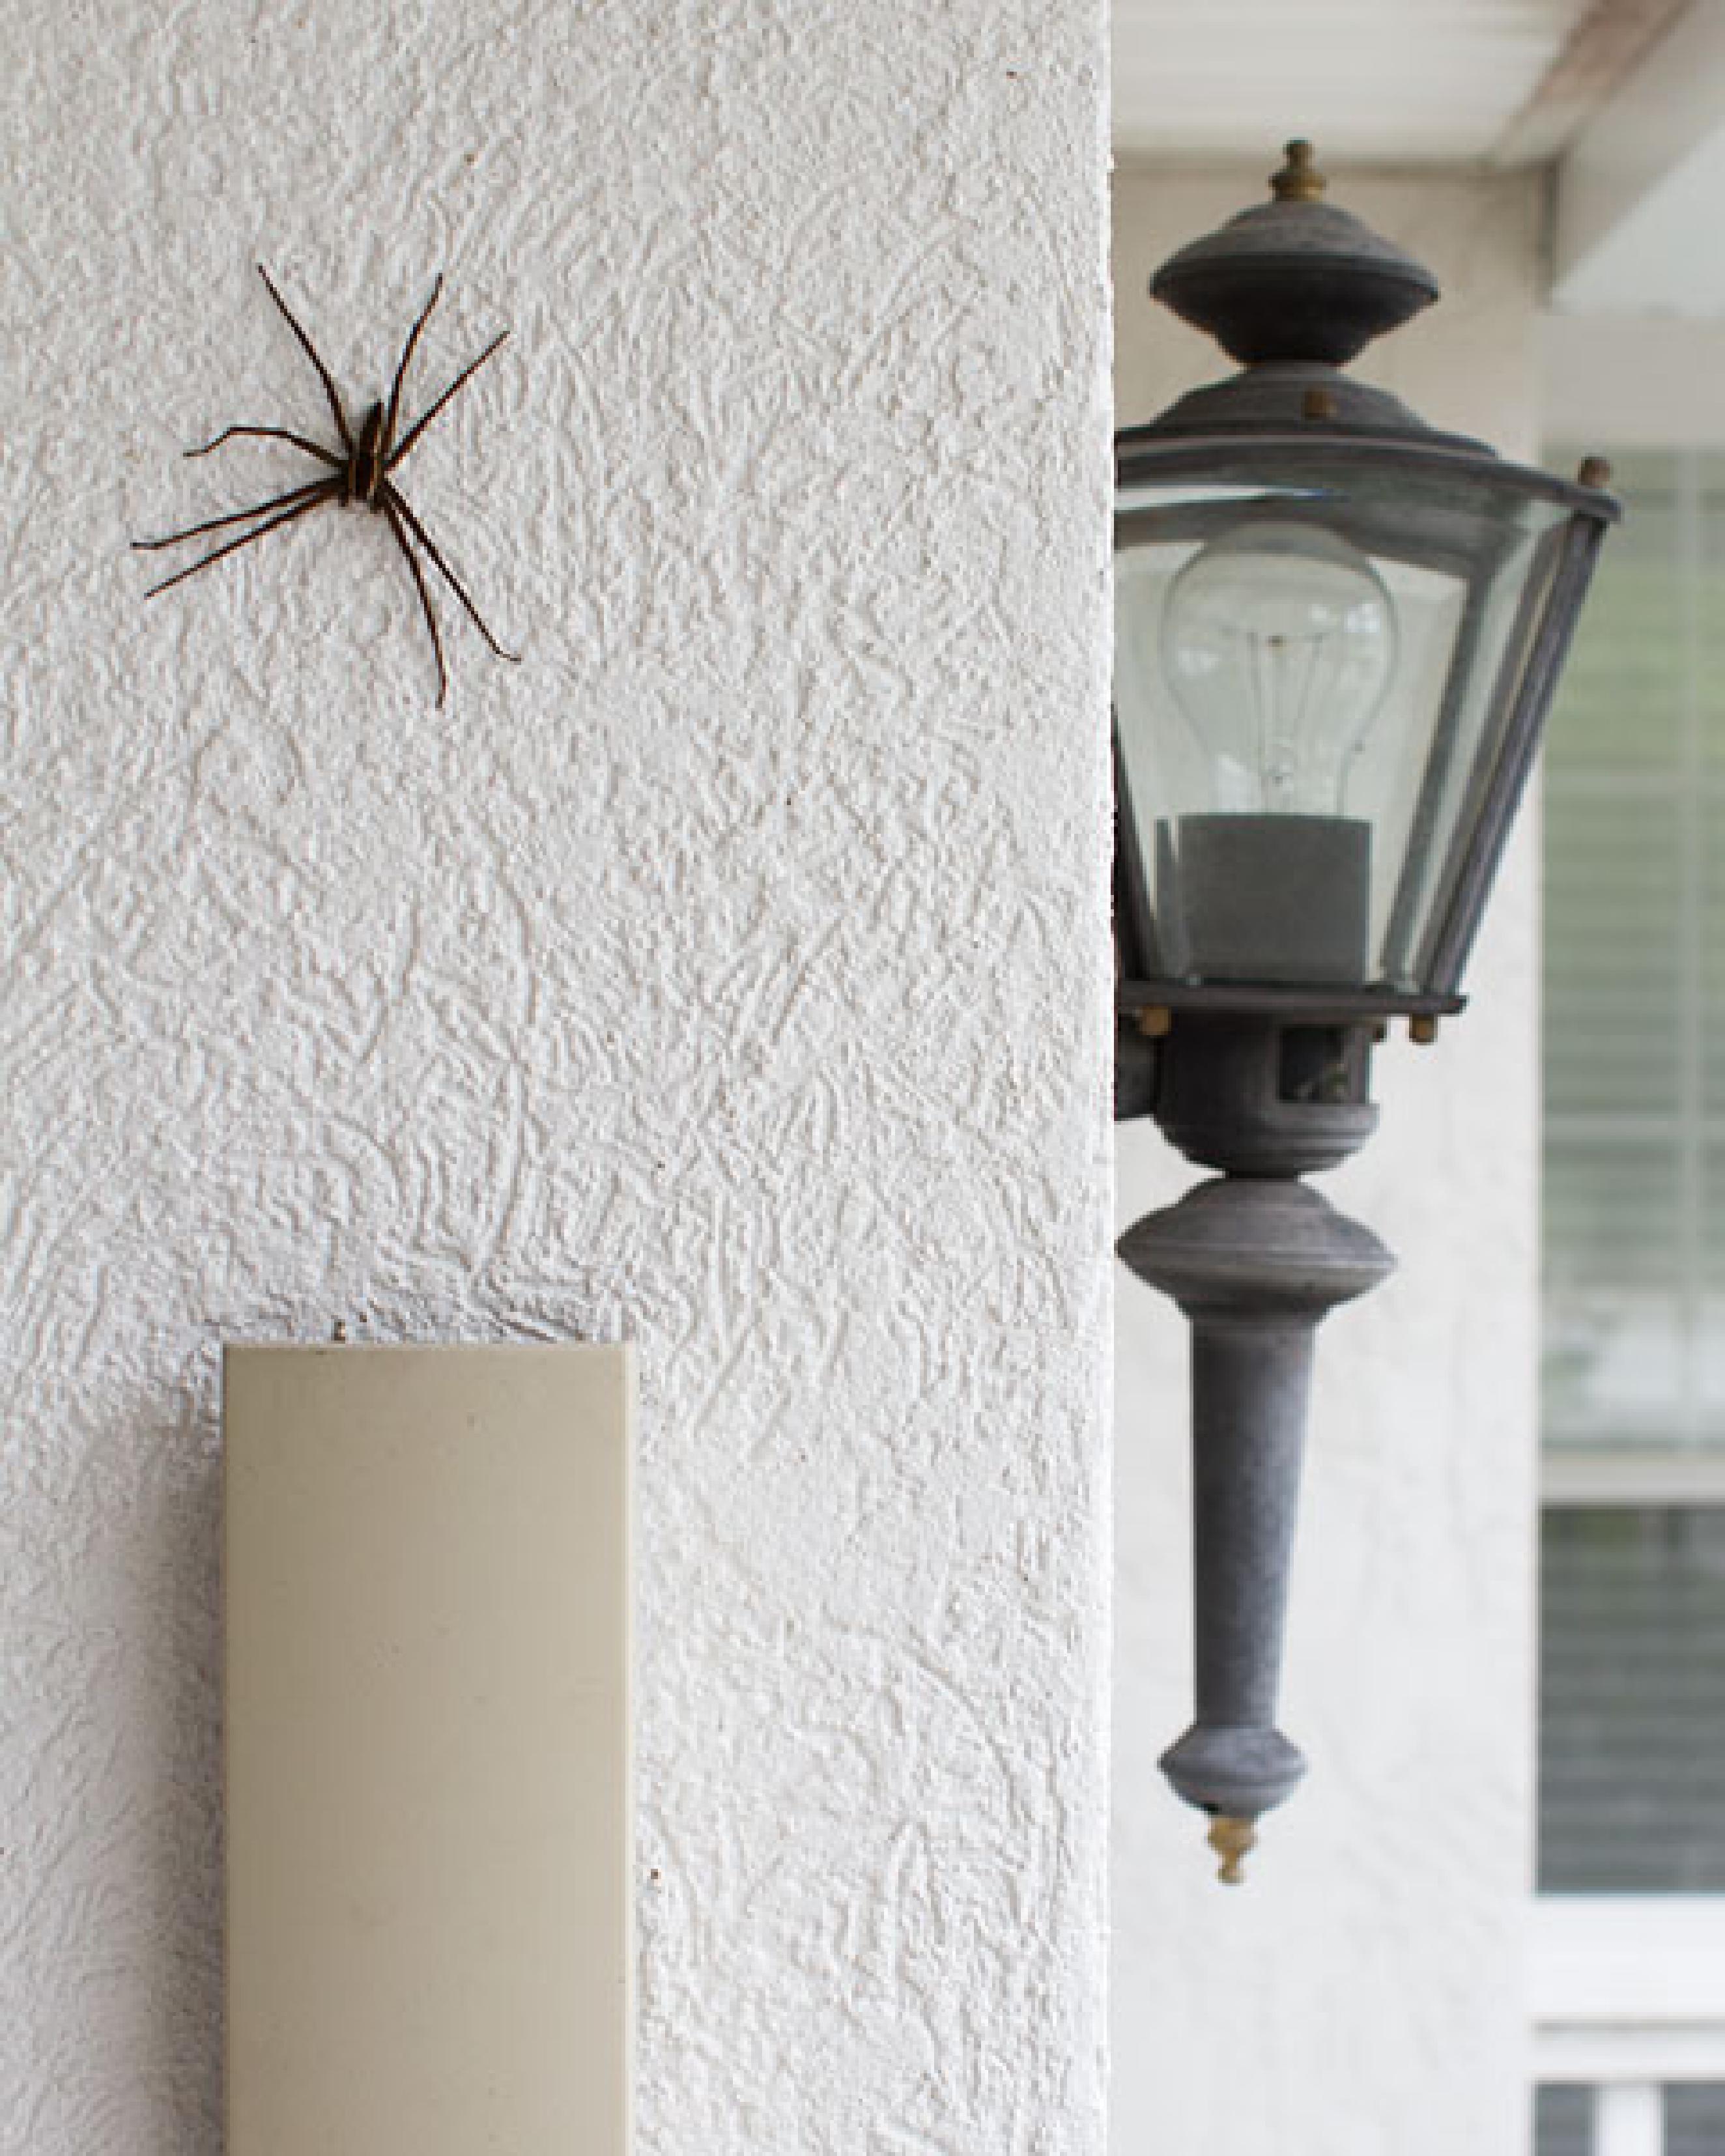 A photo of the side of a house showing a big spider in the foreground on the side of the wall and a sconce light on the right side of the frame which is around the corder